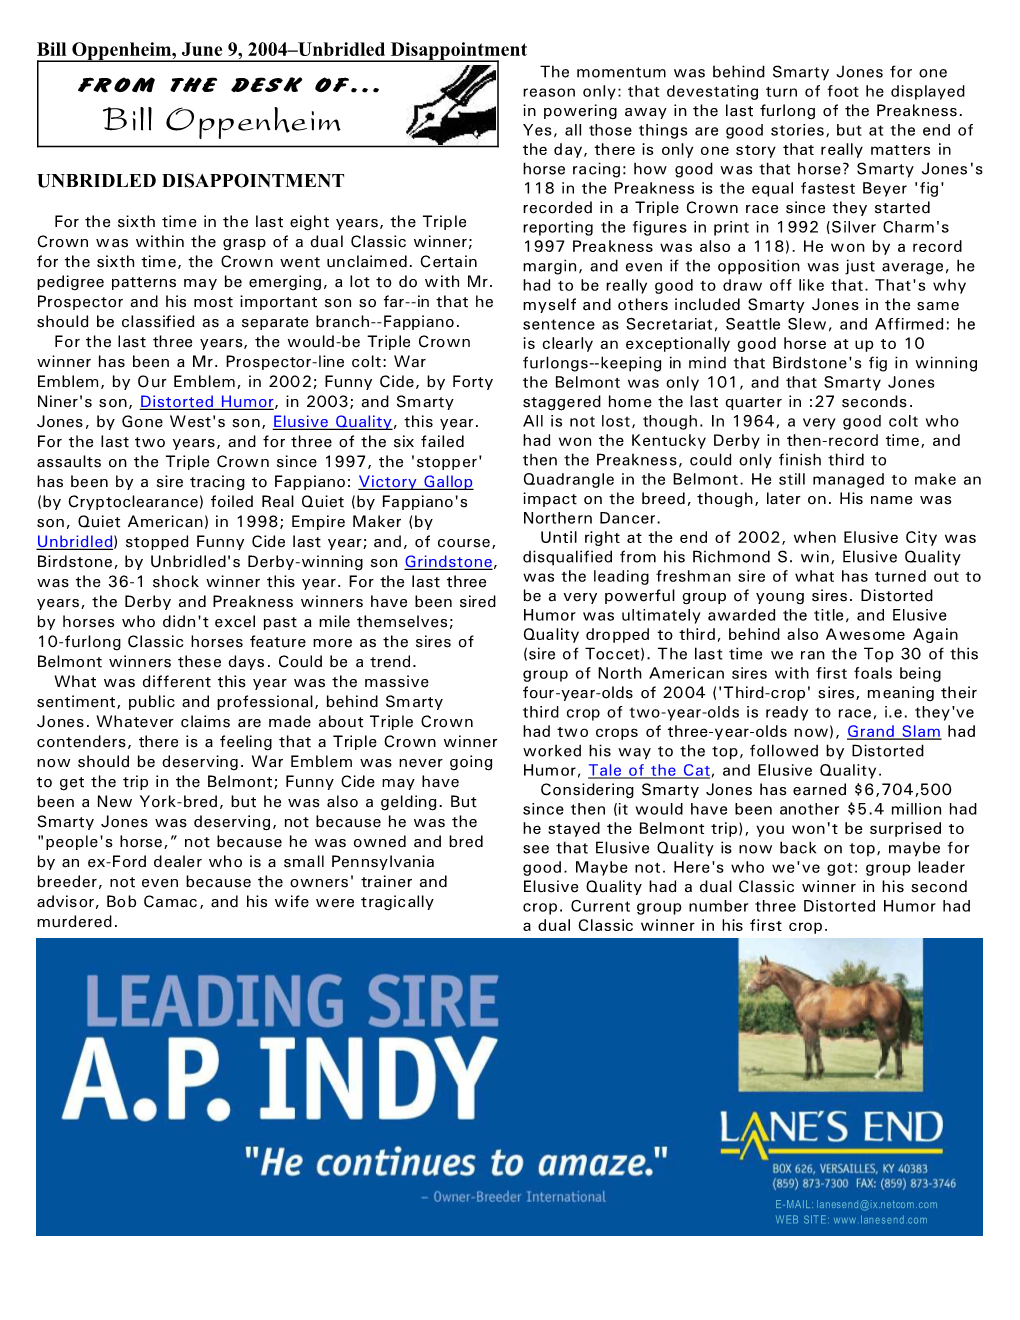 Bill Oppenheim, June 9, 2004–Unbridled Disappointment the Momentum Was Behind Smarty Jones for One from the DESK OF